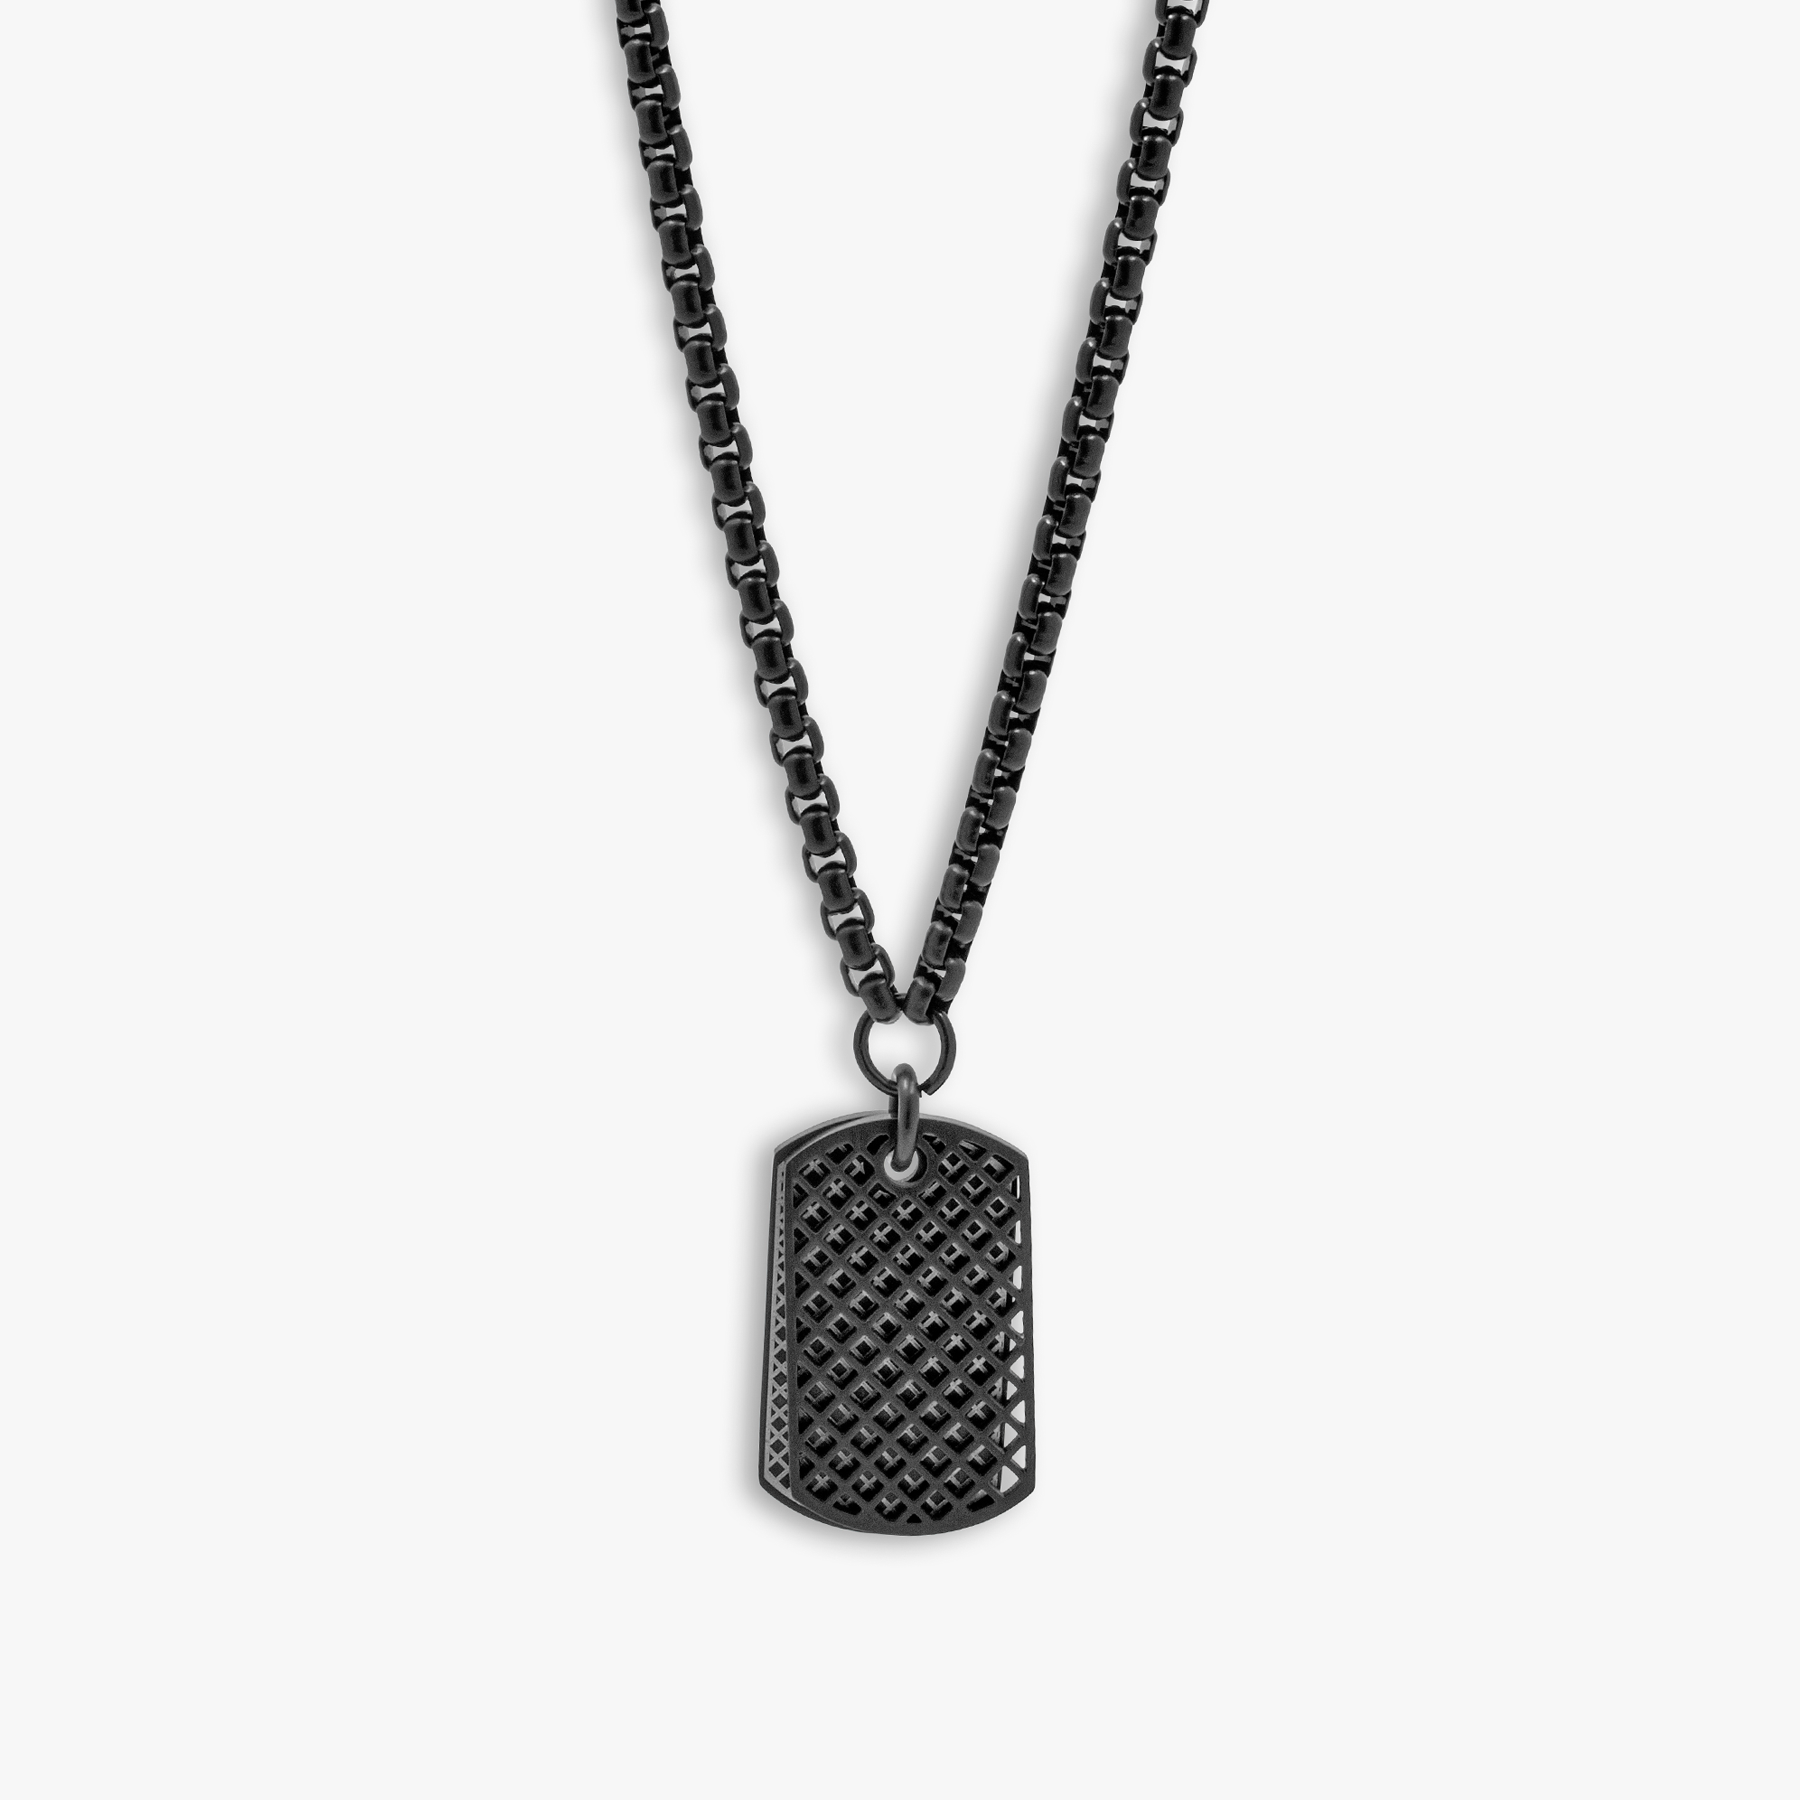 Stylish Black Dog Tag Necklaces for Men Boys, Waterproof Stainless